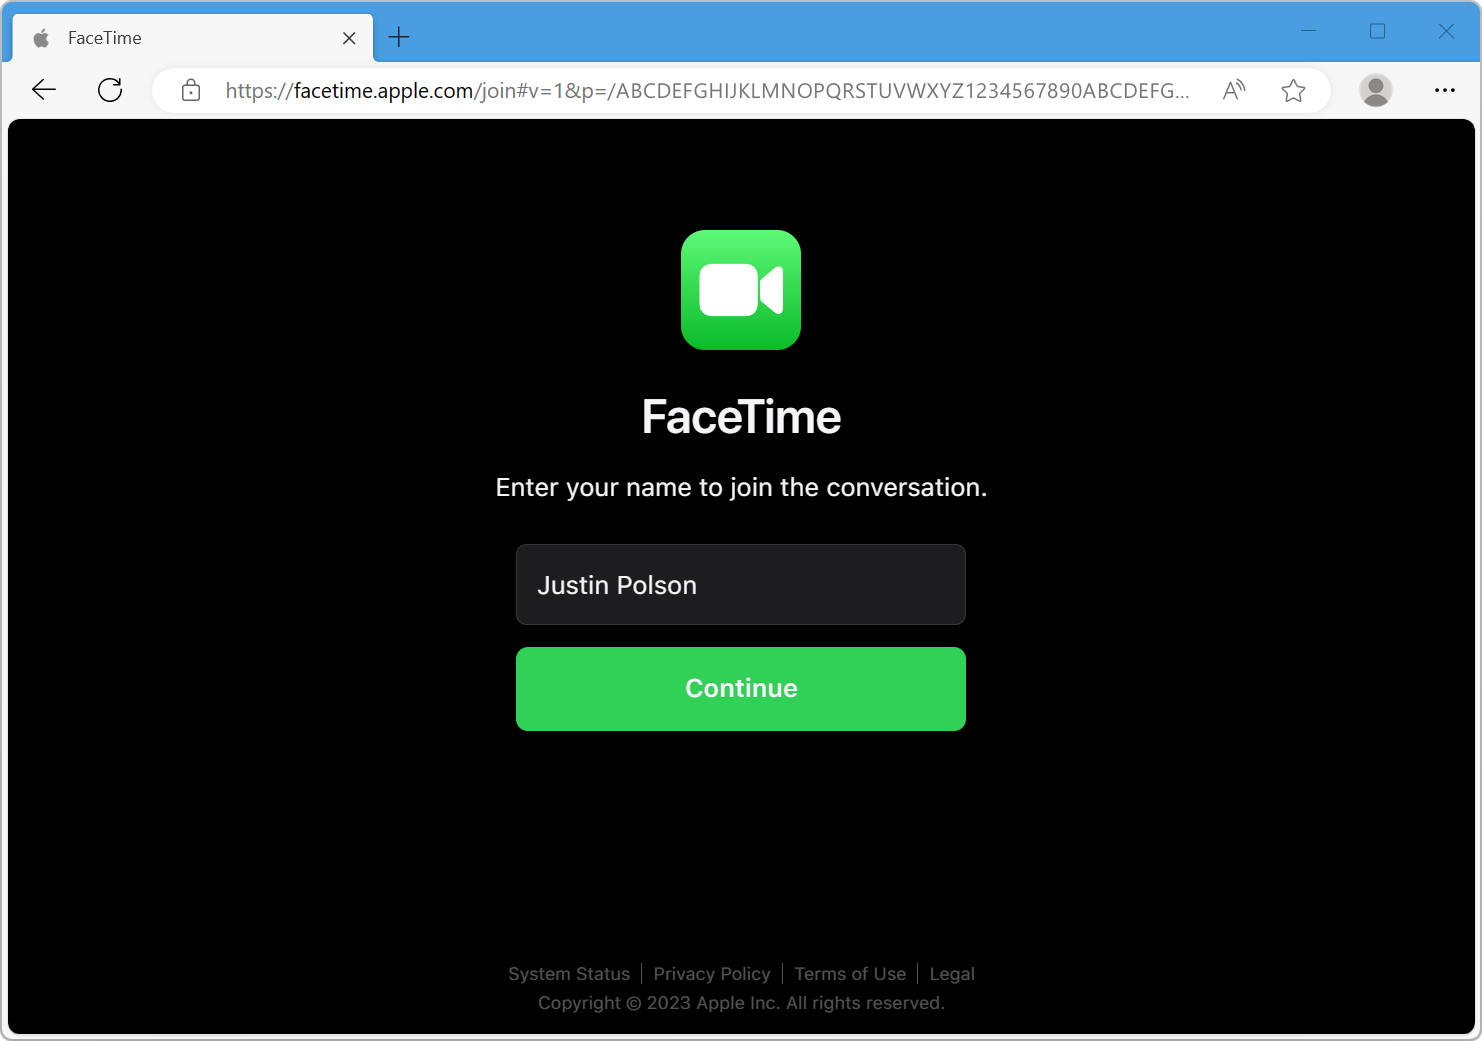 FaceTime link screen in web browser: "Enter your name to joine the conversation."